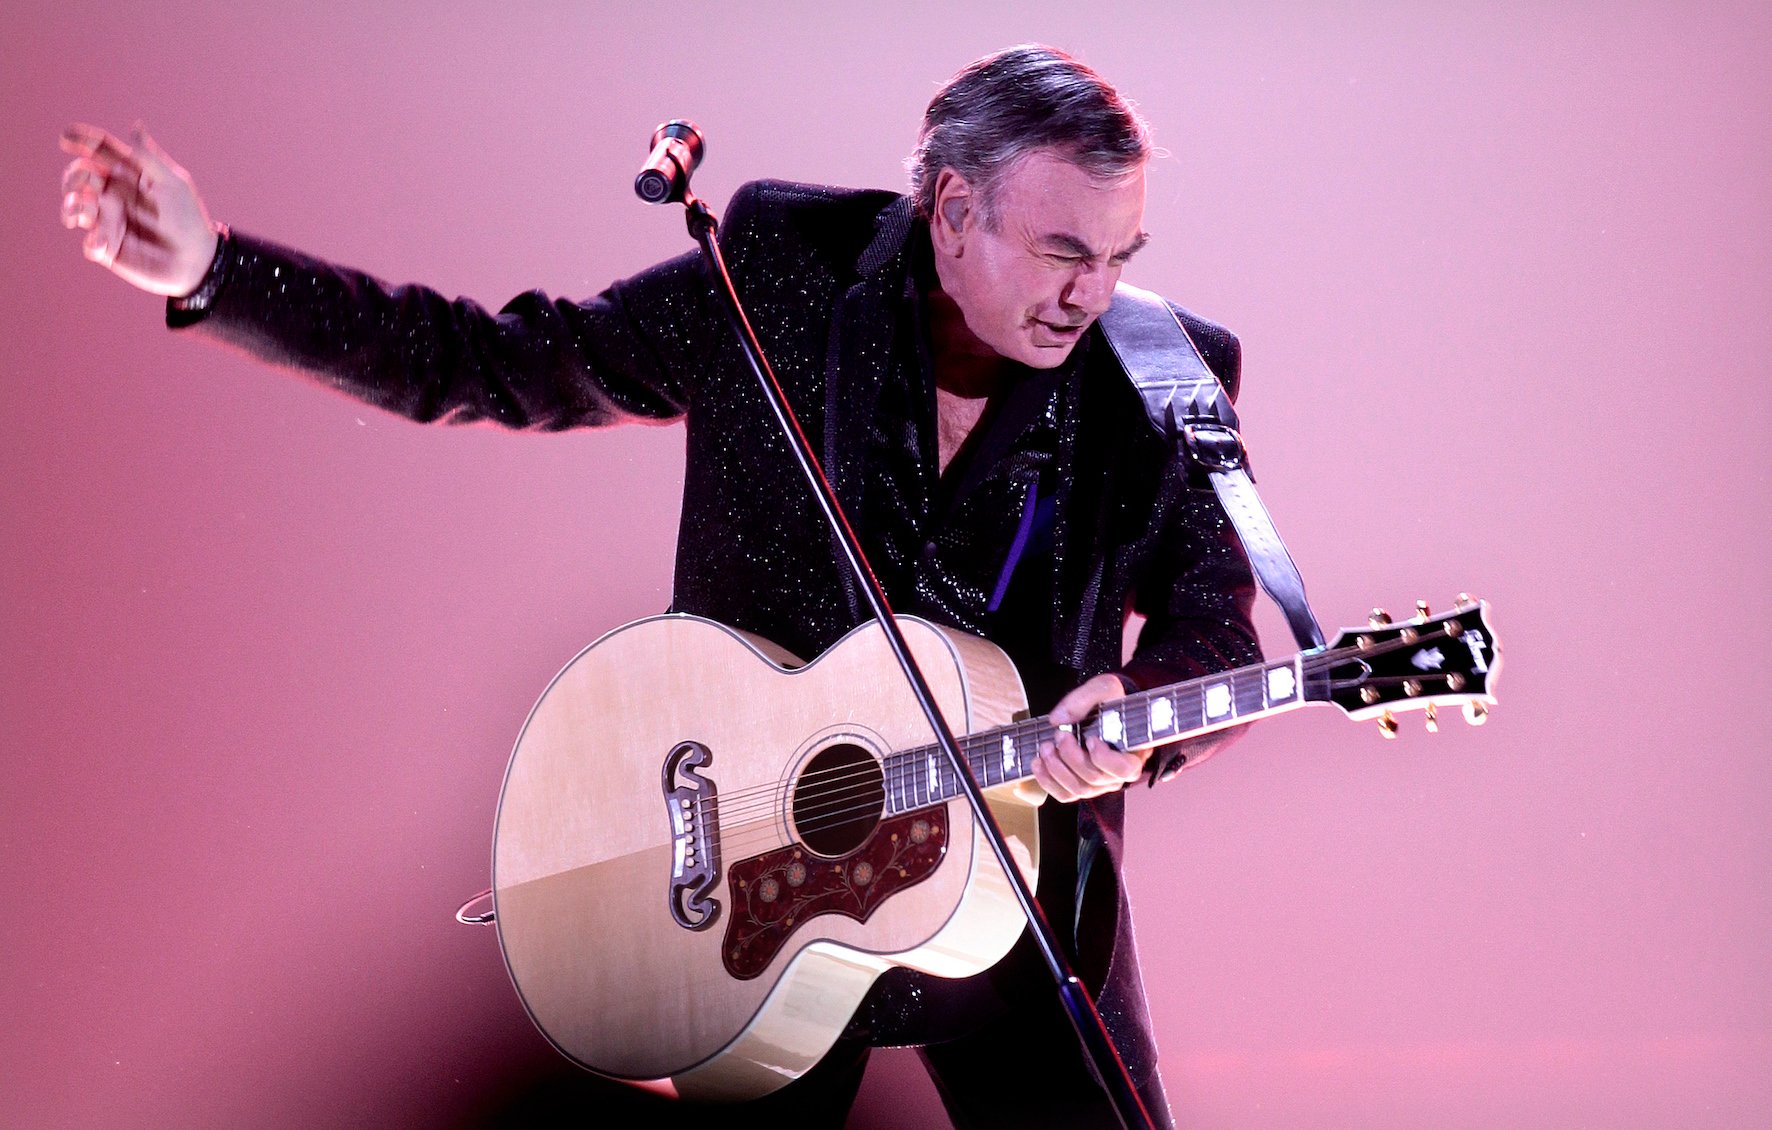 Neil Diamond playing his guitar against a pink background